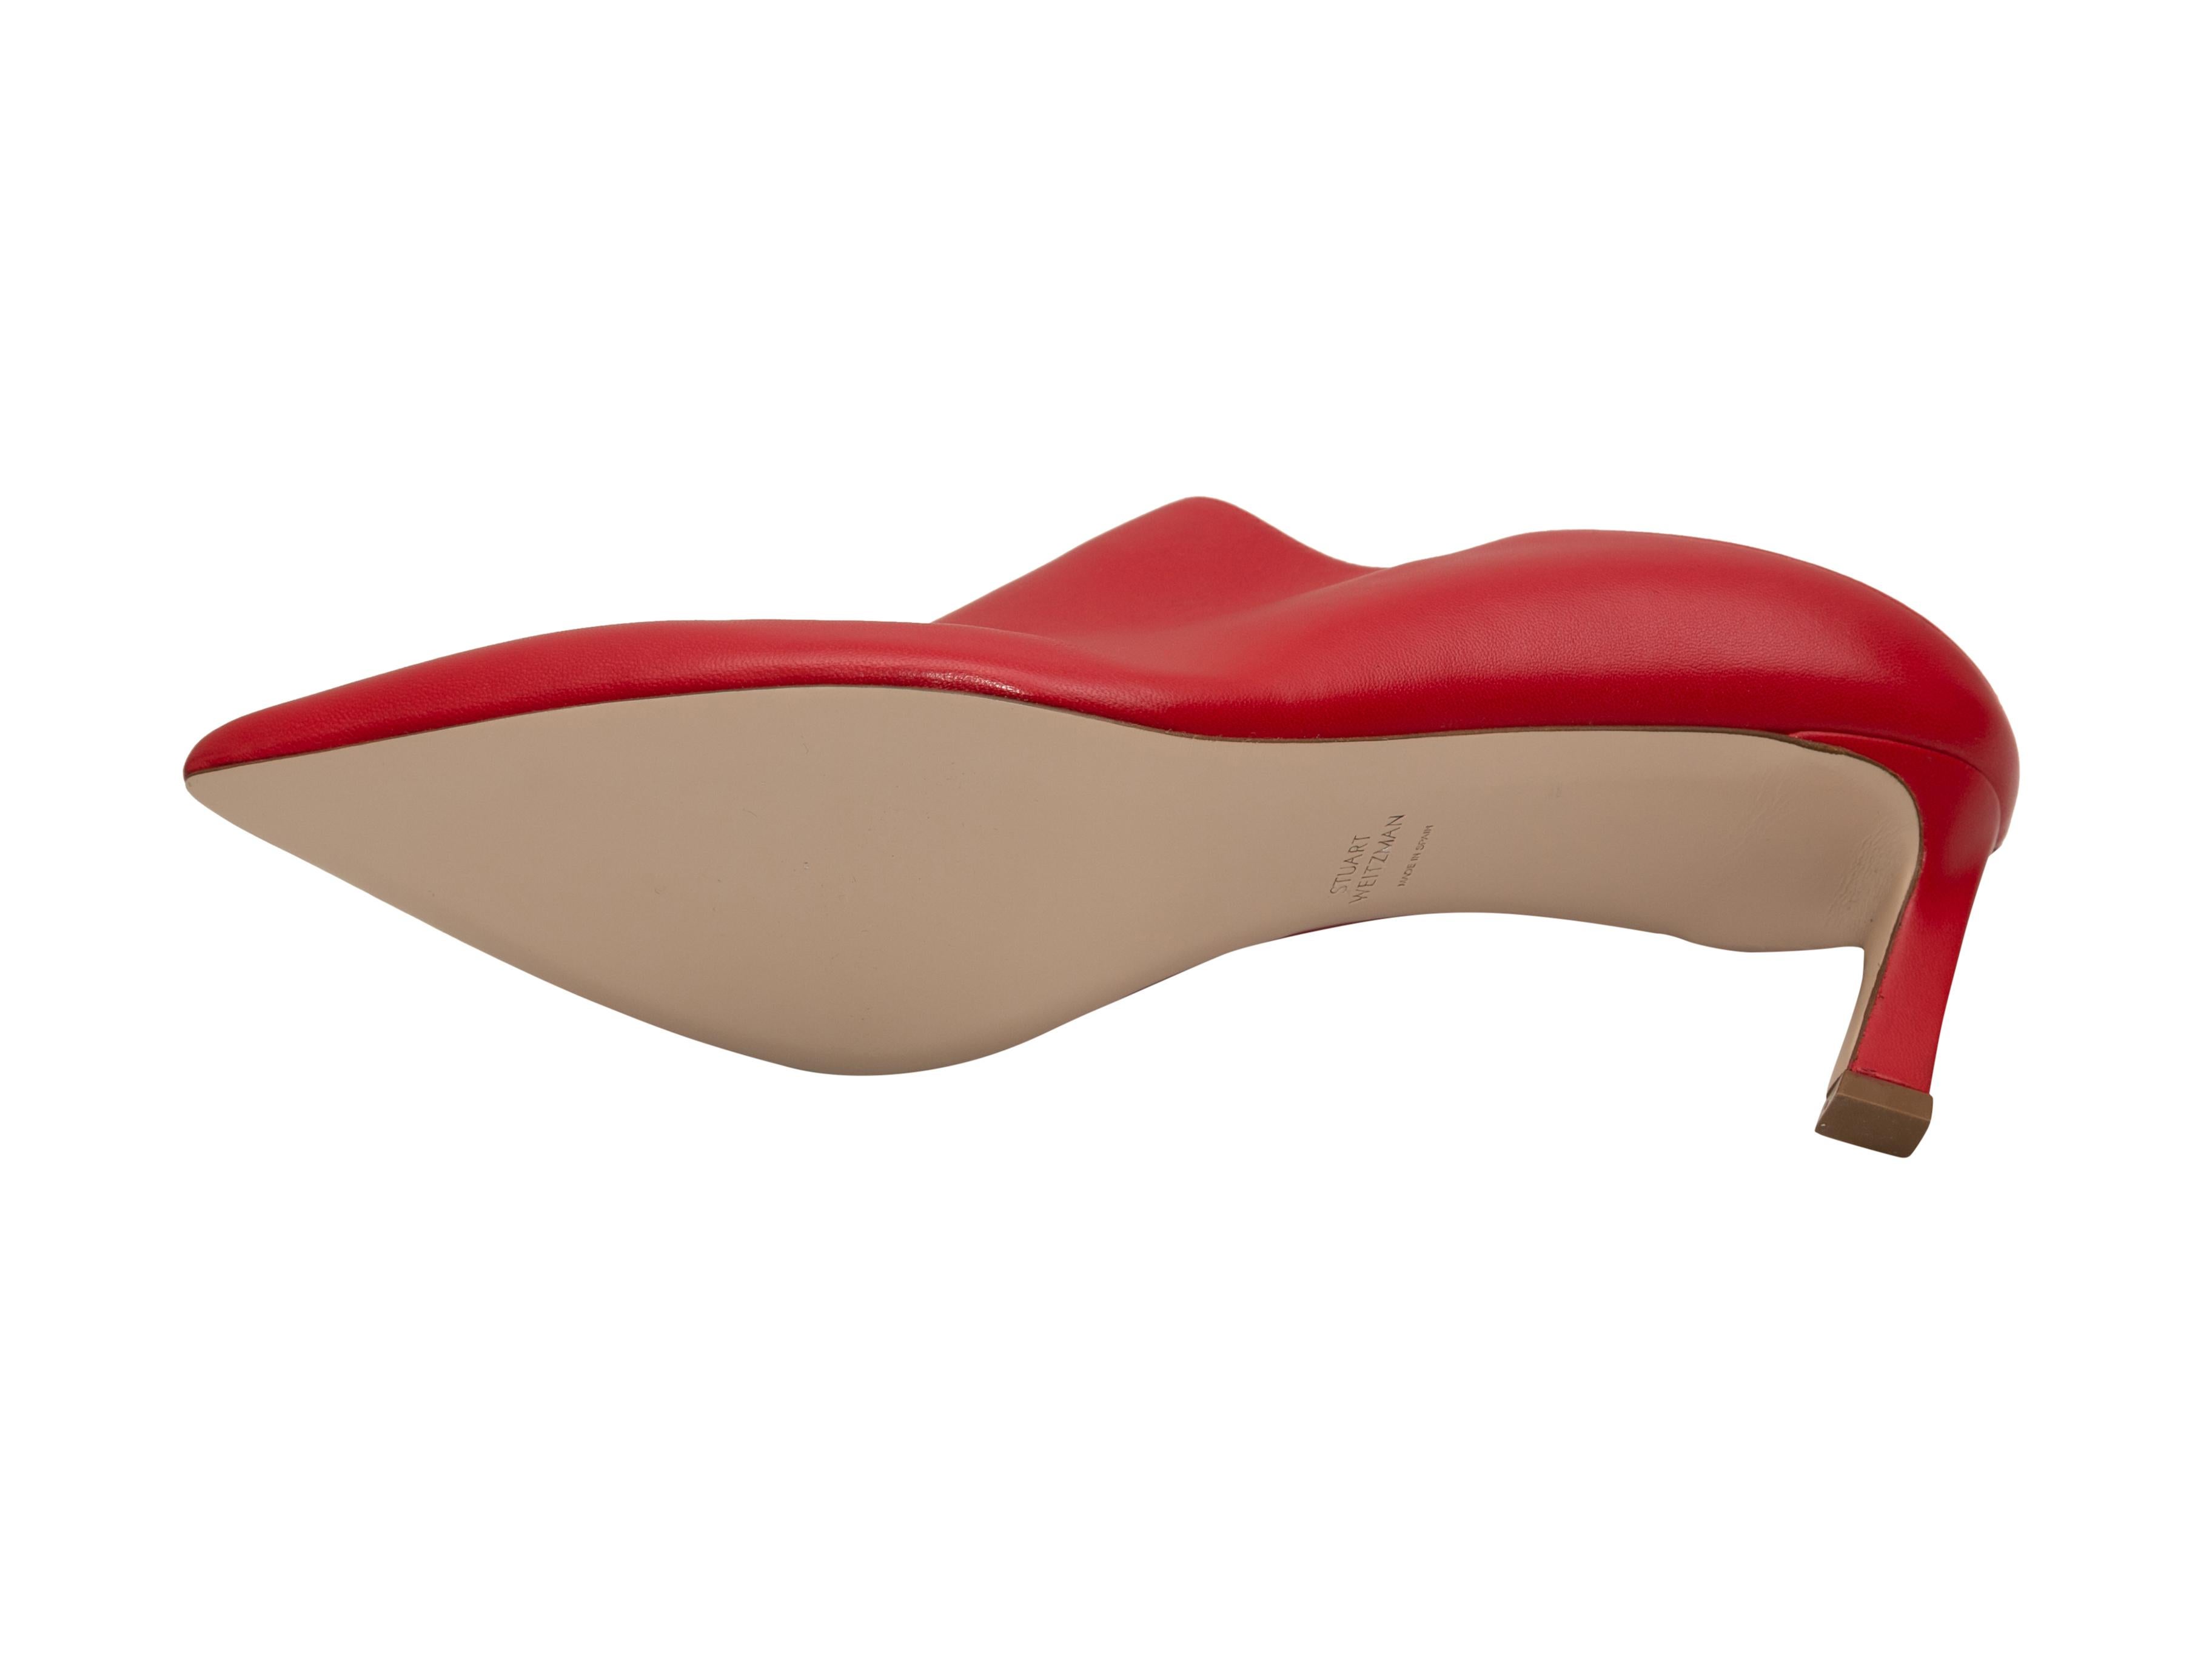 Product details: Red leather pointed-toe mules by Stuart Weitzman. 2.5